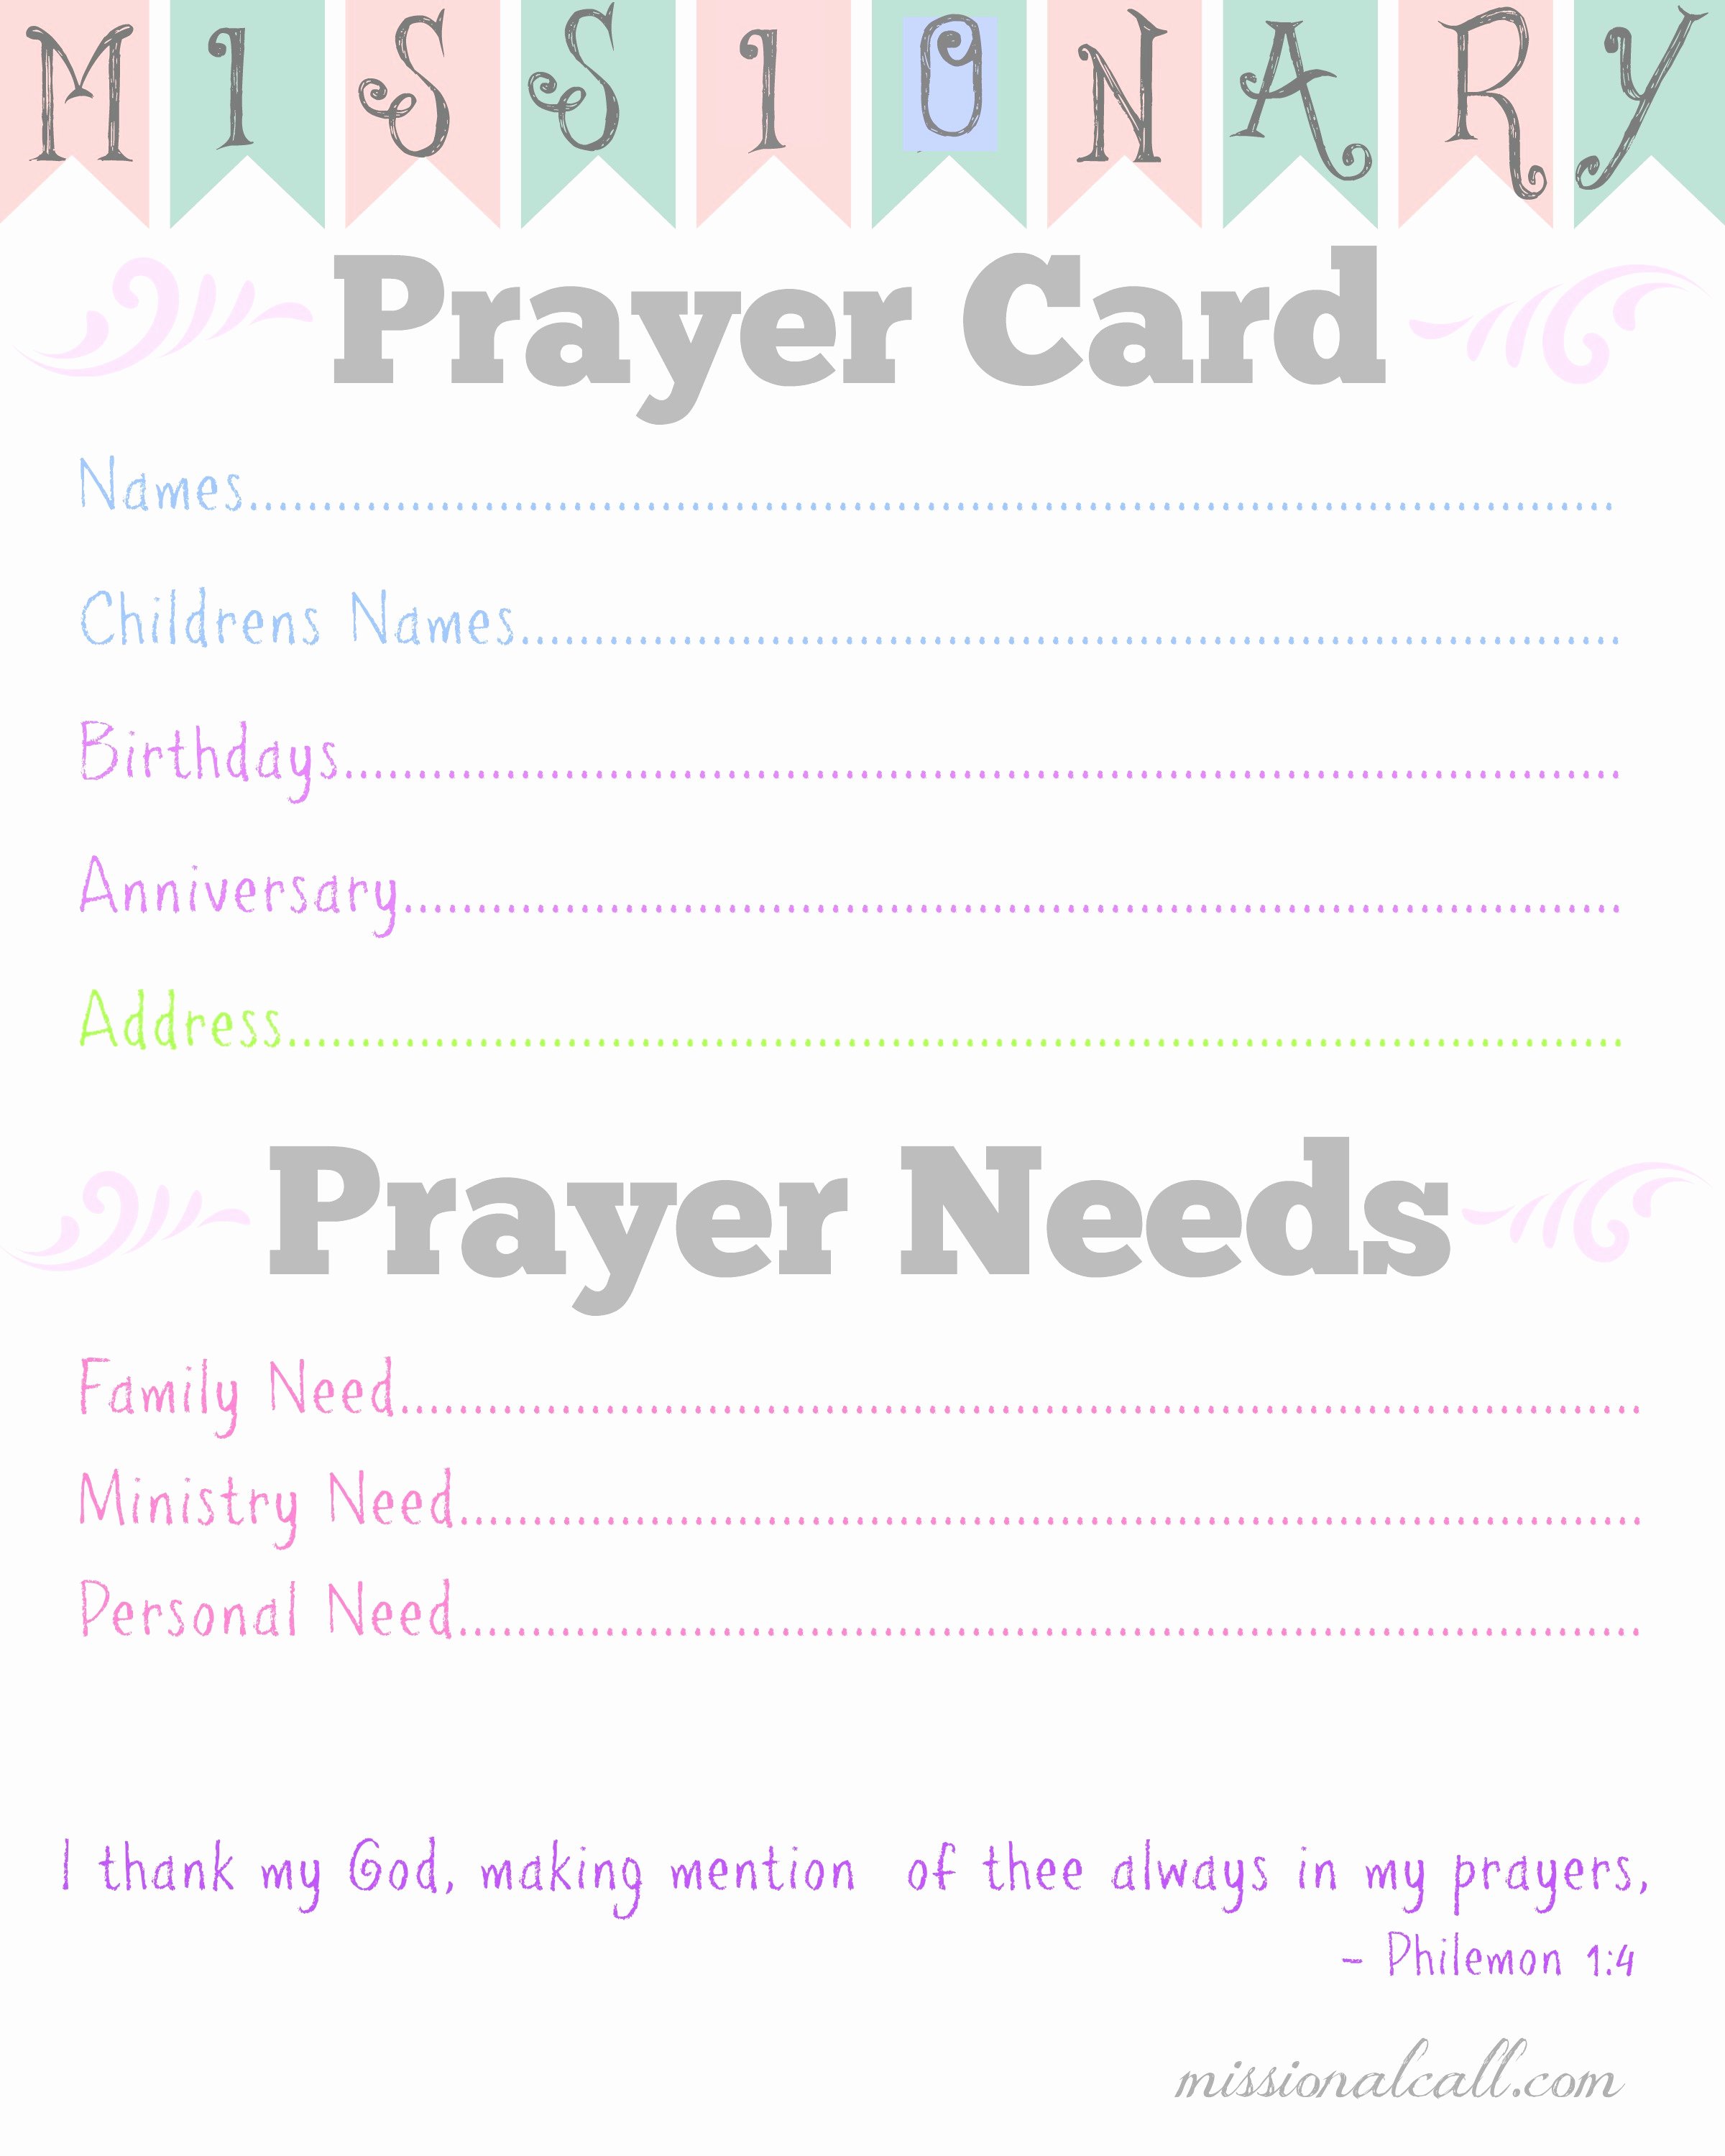 Missionary Prayer Card Template Free Best Of Free Prayer Card Templates